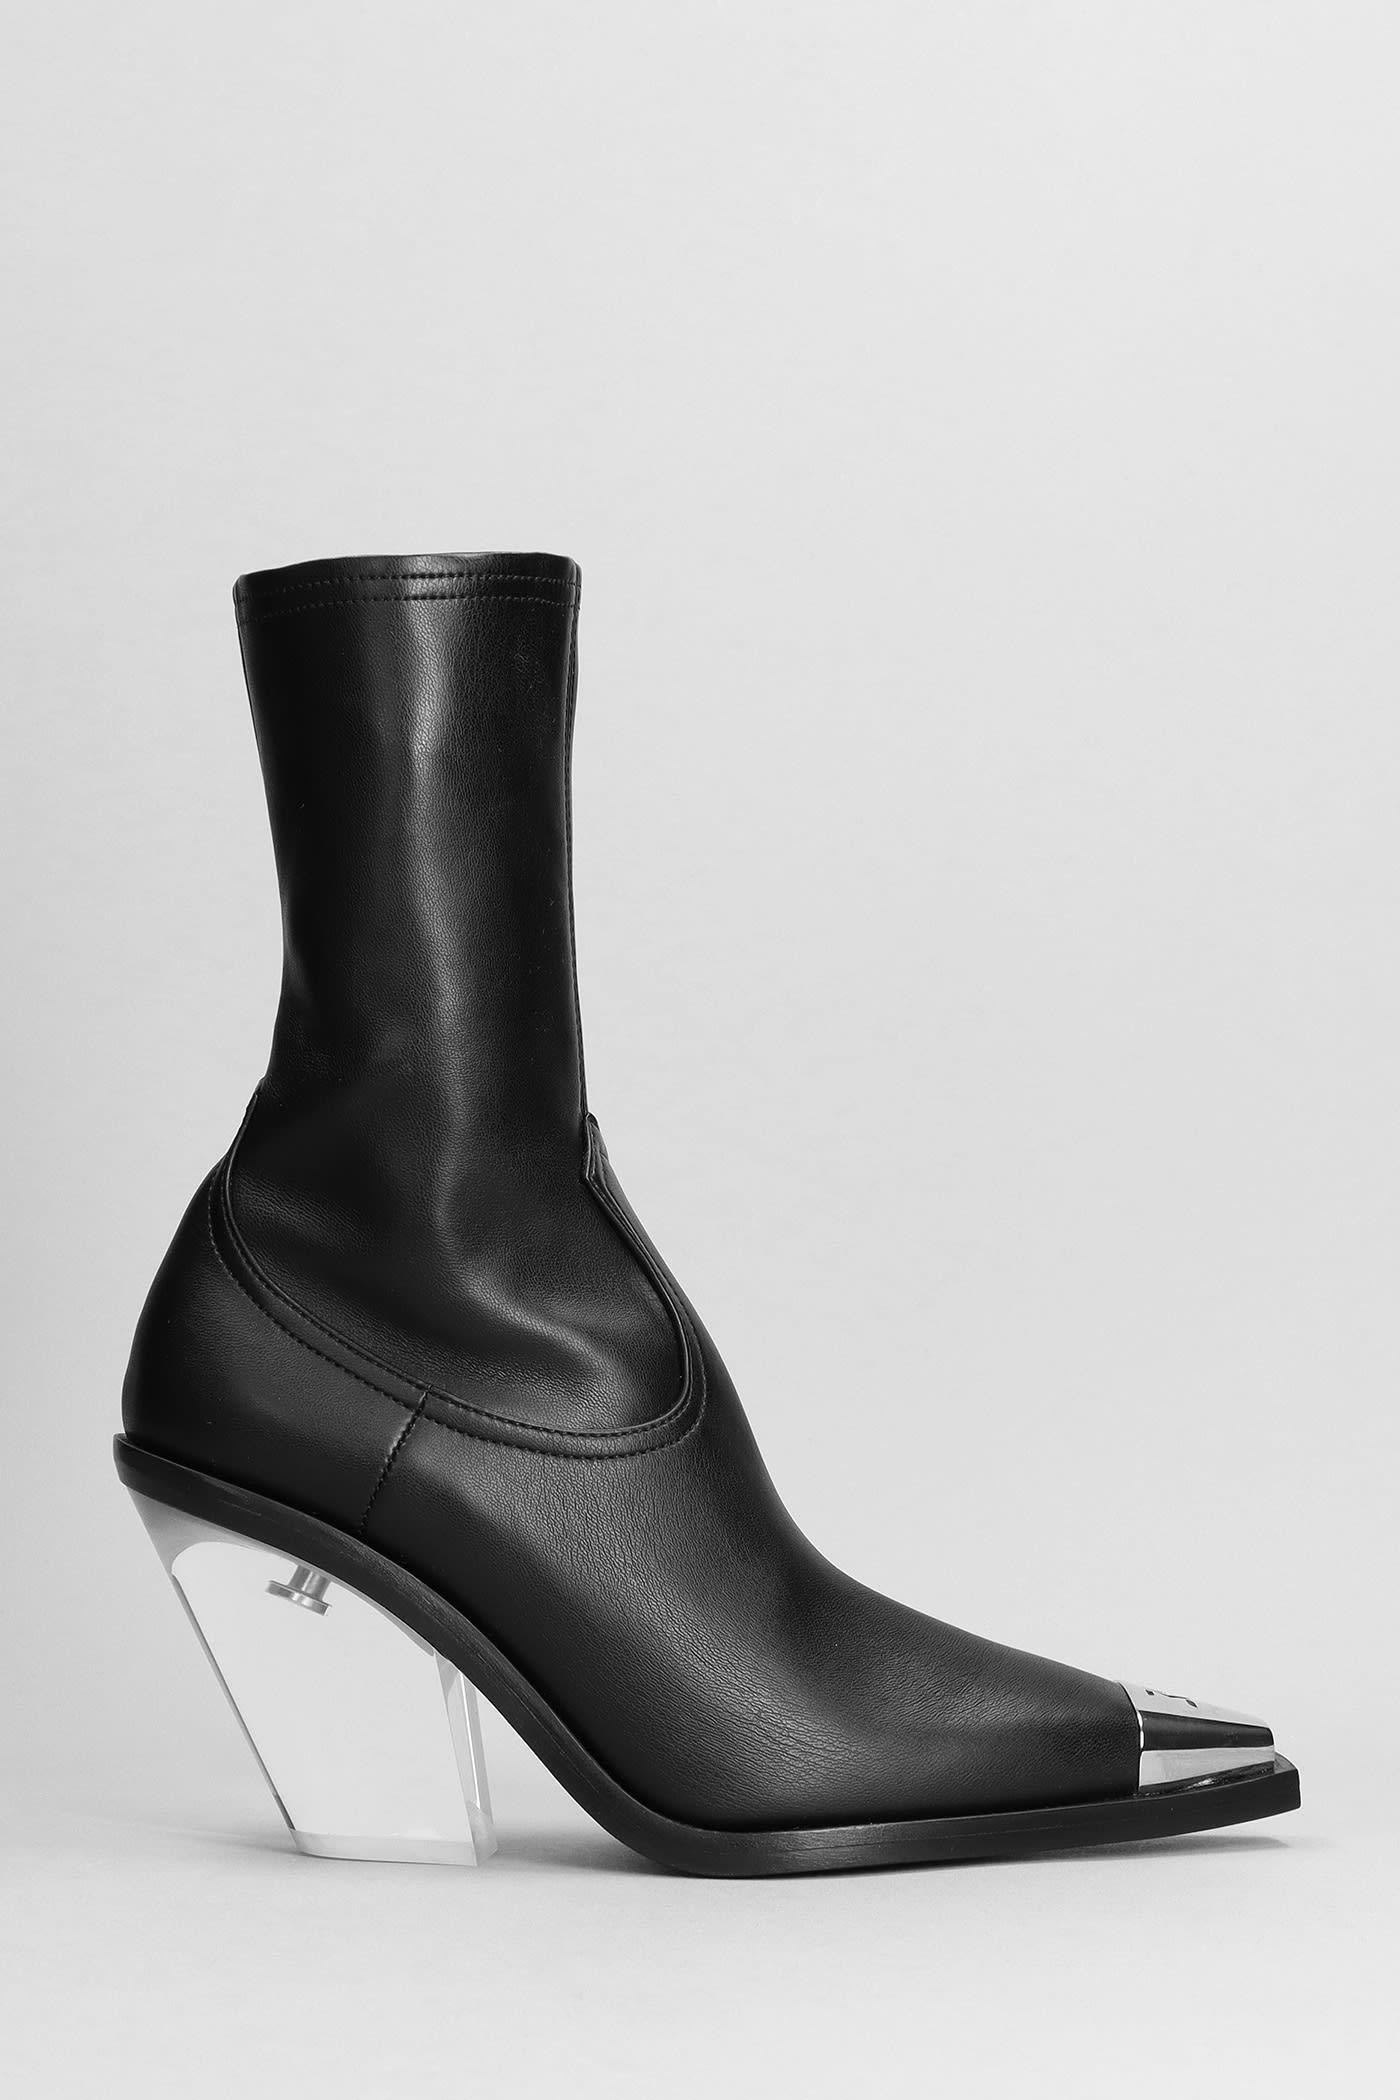 David Koma High Heels Ankle Boots In Black Leather | Lyst